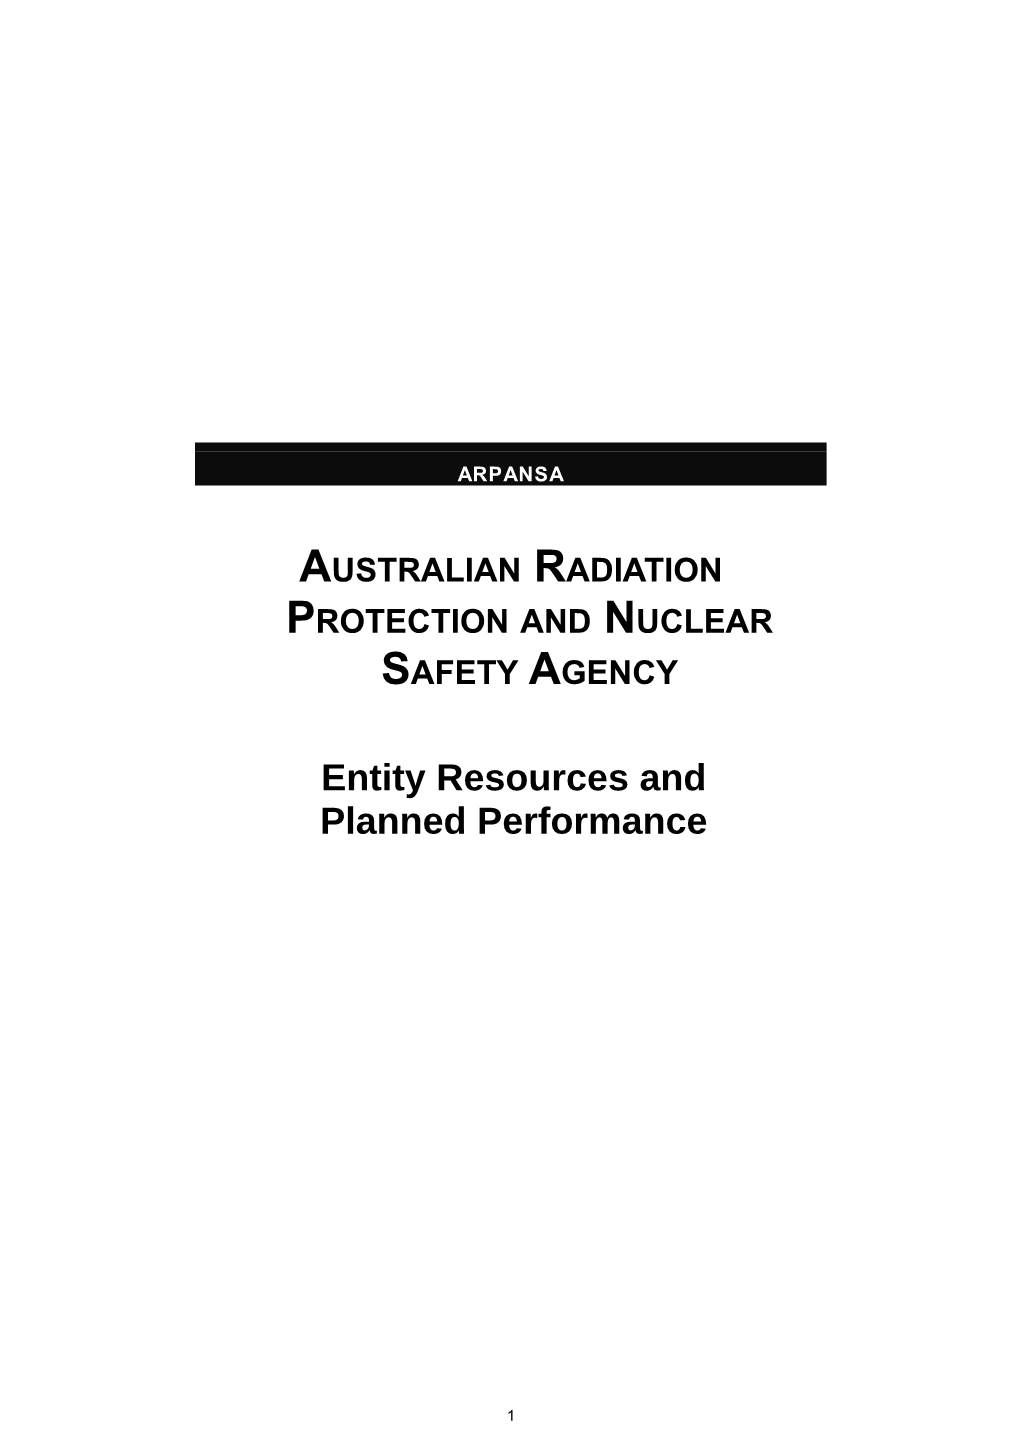 Australian Radiation Protection and Nuclear Safety Agency